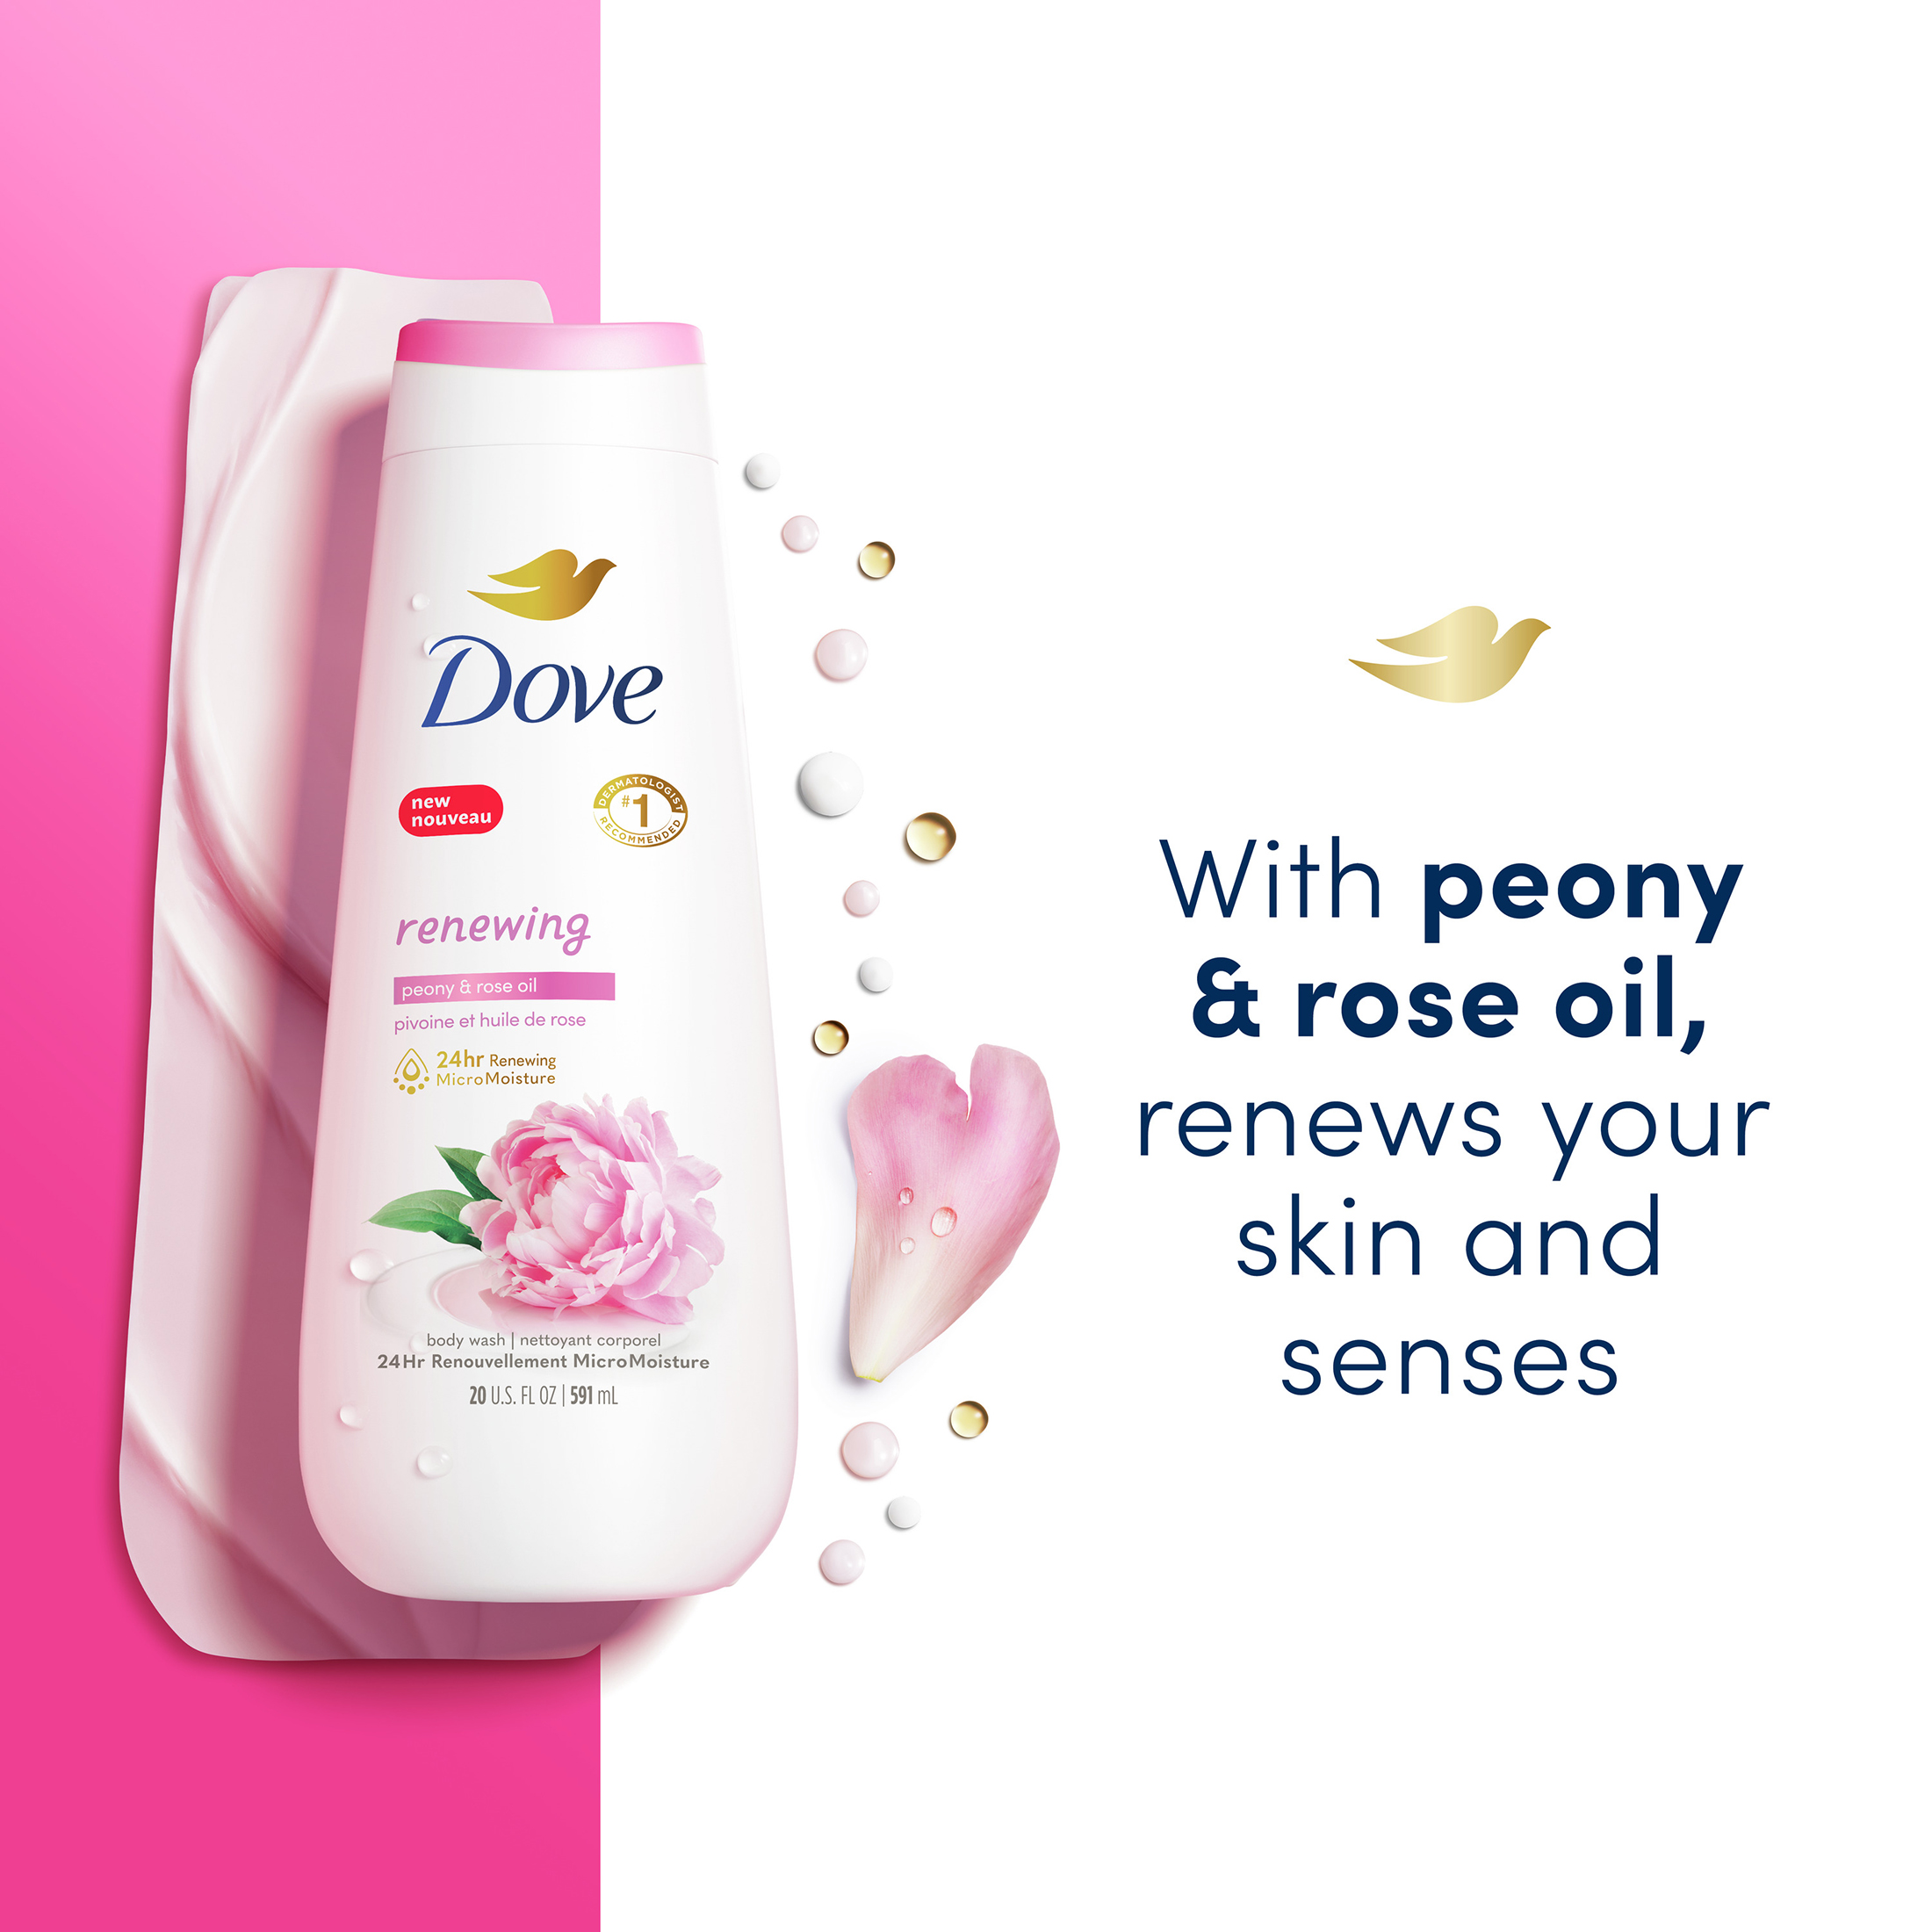 Dove Renewing Gentle Women's Body Wash for All Skin Type, Peony and Rose Oil, 20 fl oz - image 5 of 11